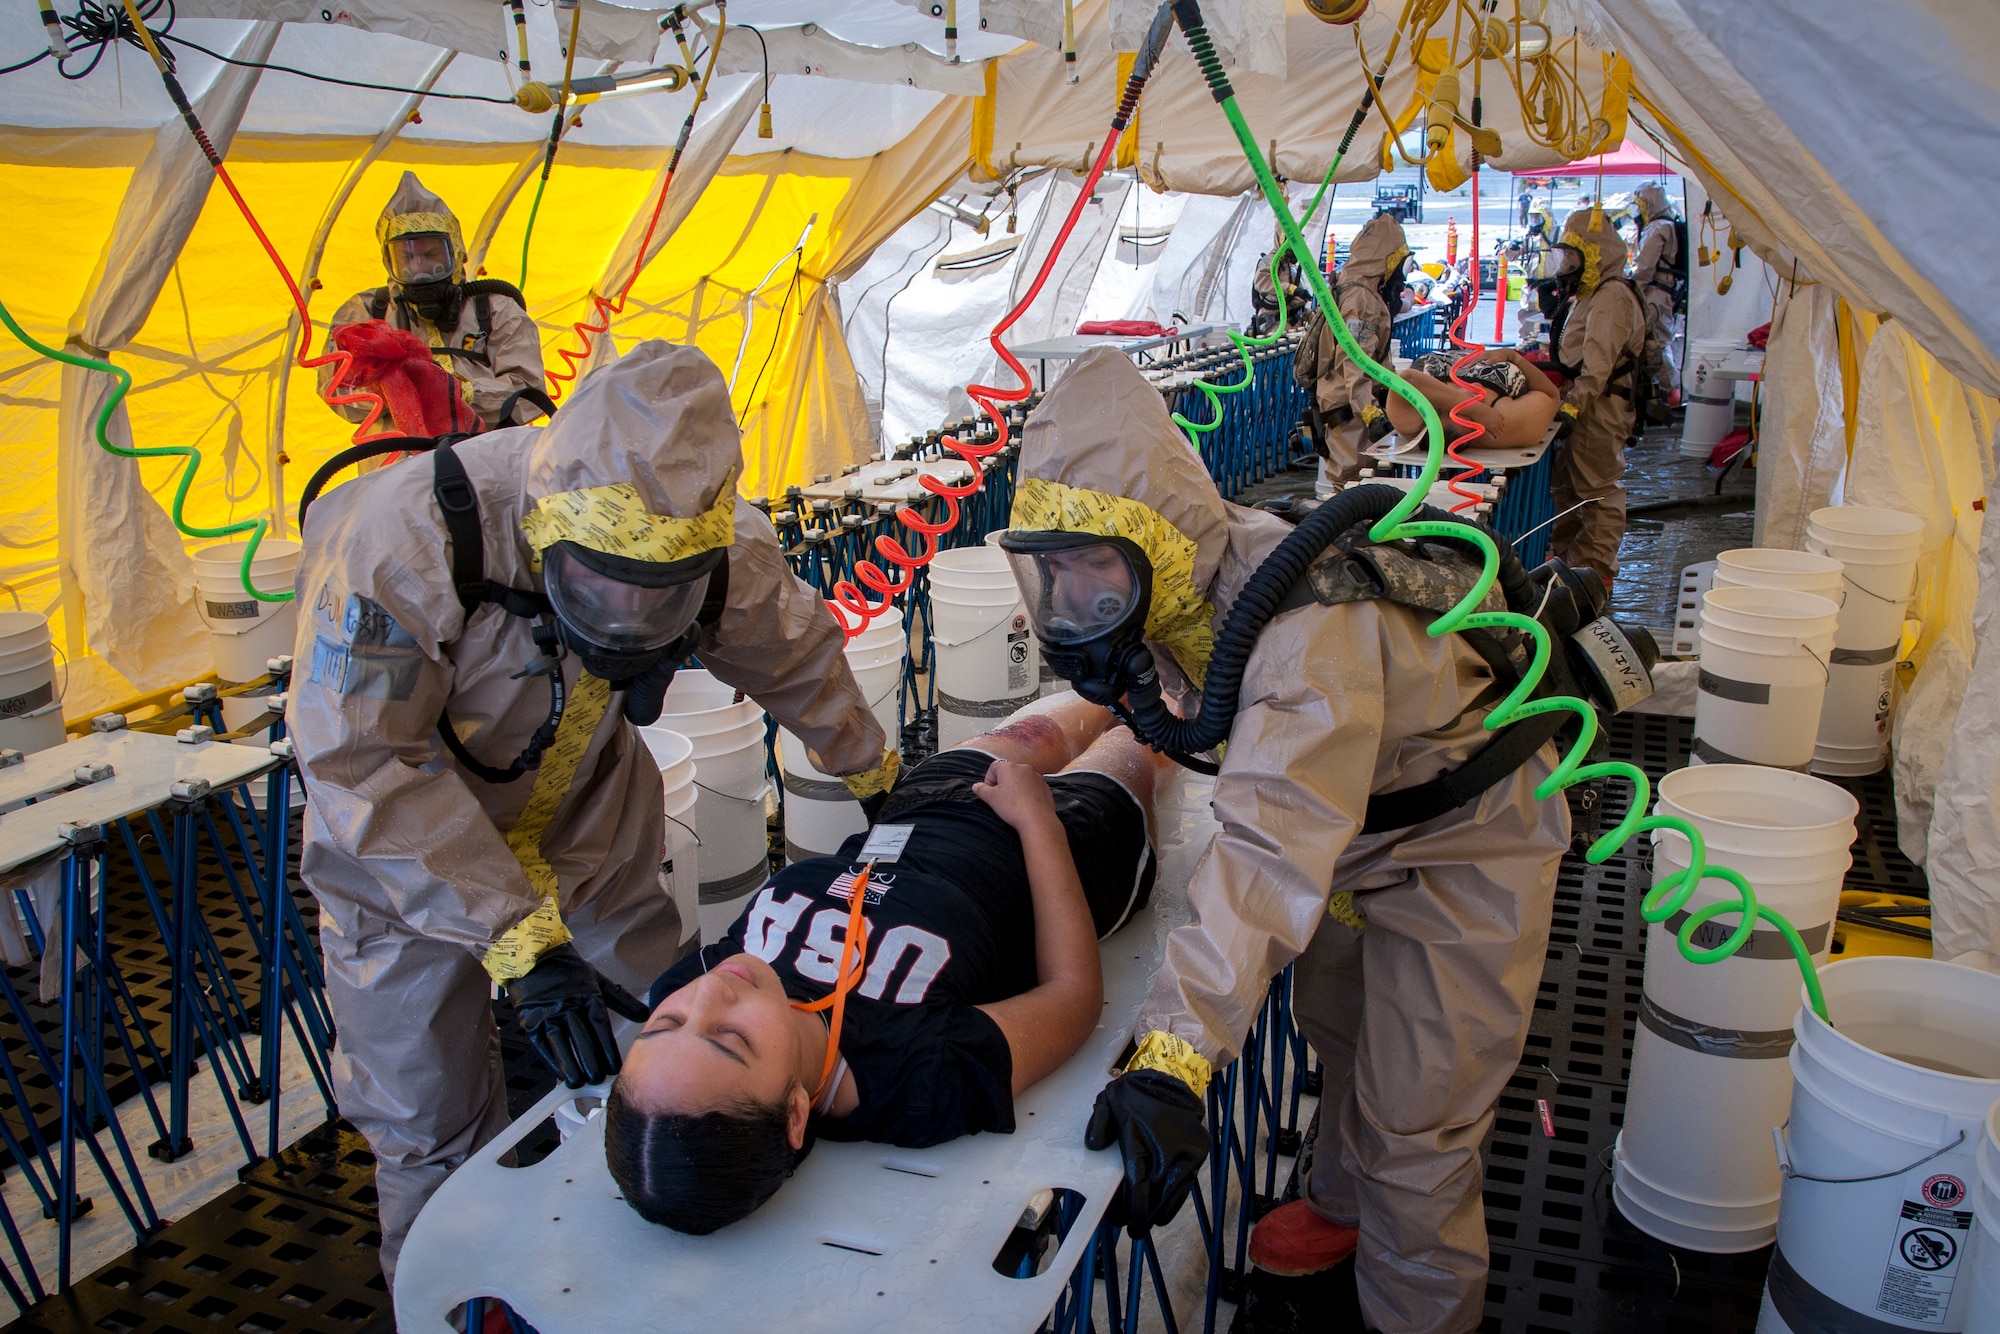 Hot-zone team members from Hawaii’s Chemical, Biological, Radiological, Nuclear, and High-Yield Explosive, Enhanced-Response-Force-Package Team (CERFP) process simulated casualties through a non-ambulatory decontamination zone during an evaluation exercise March 9, 2019, at Kalaeloa, Hawaii.